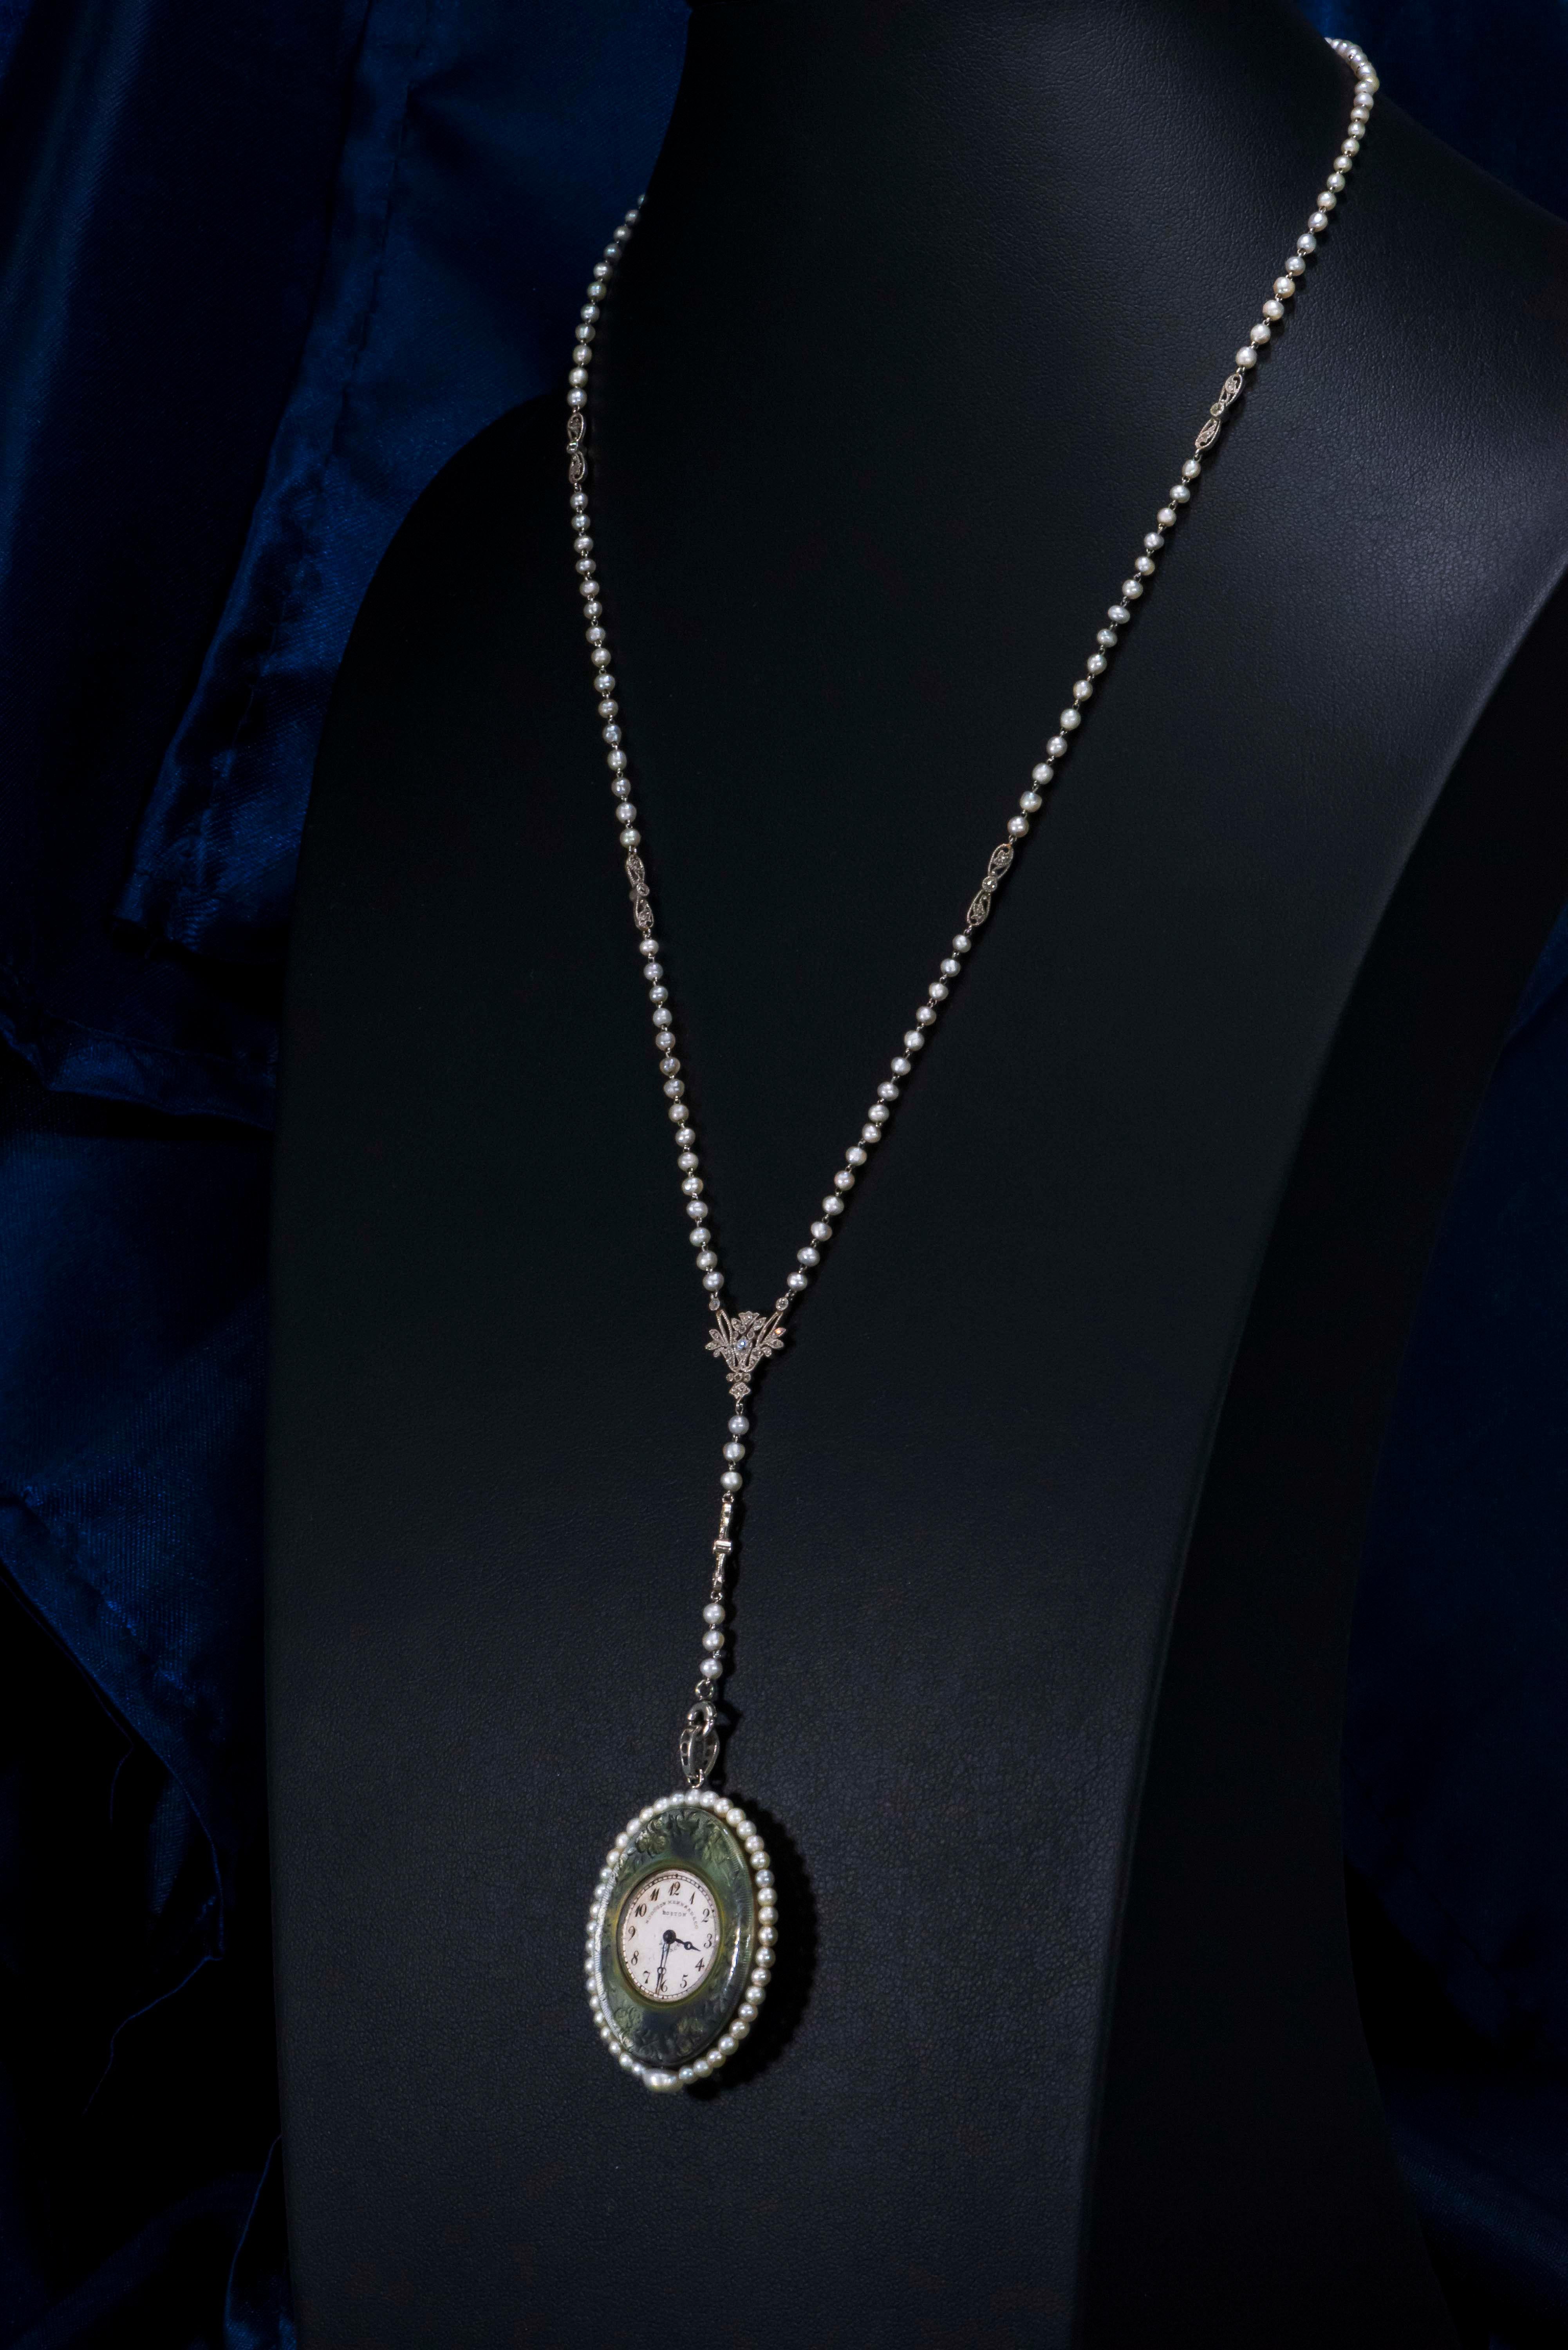 Verger Freres Paillet Platinum Diamond Enamel Pearl Necklace Pendant Watch, 1900 In Excellent Condition For Sale In New york, NY